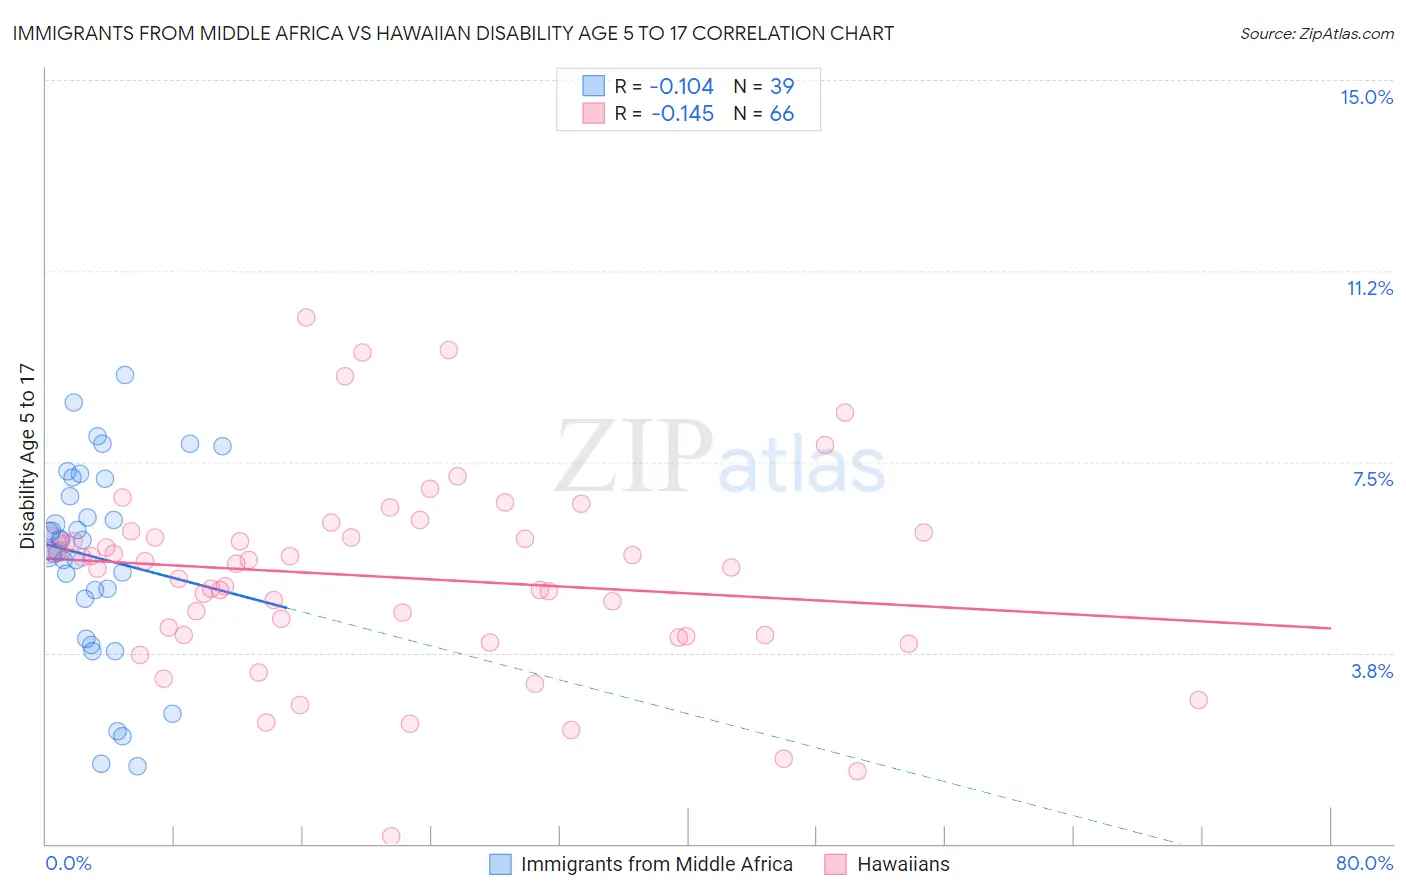 Immigrants from Middle Africa vs Hawaiian Disability Age 5 to 17